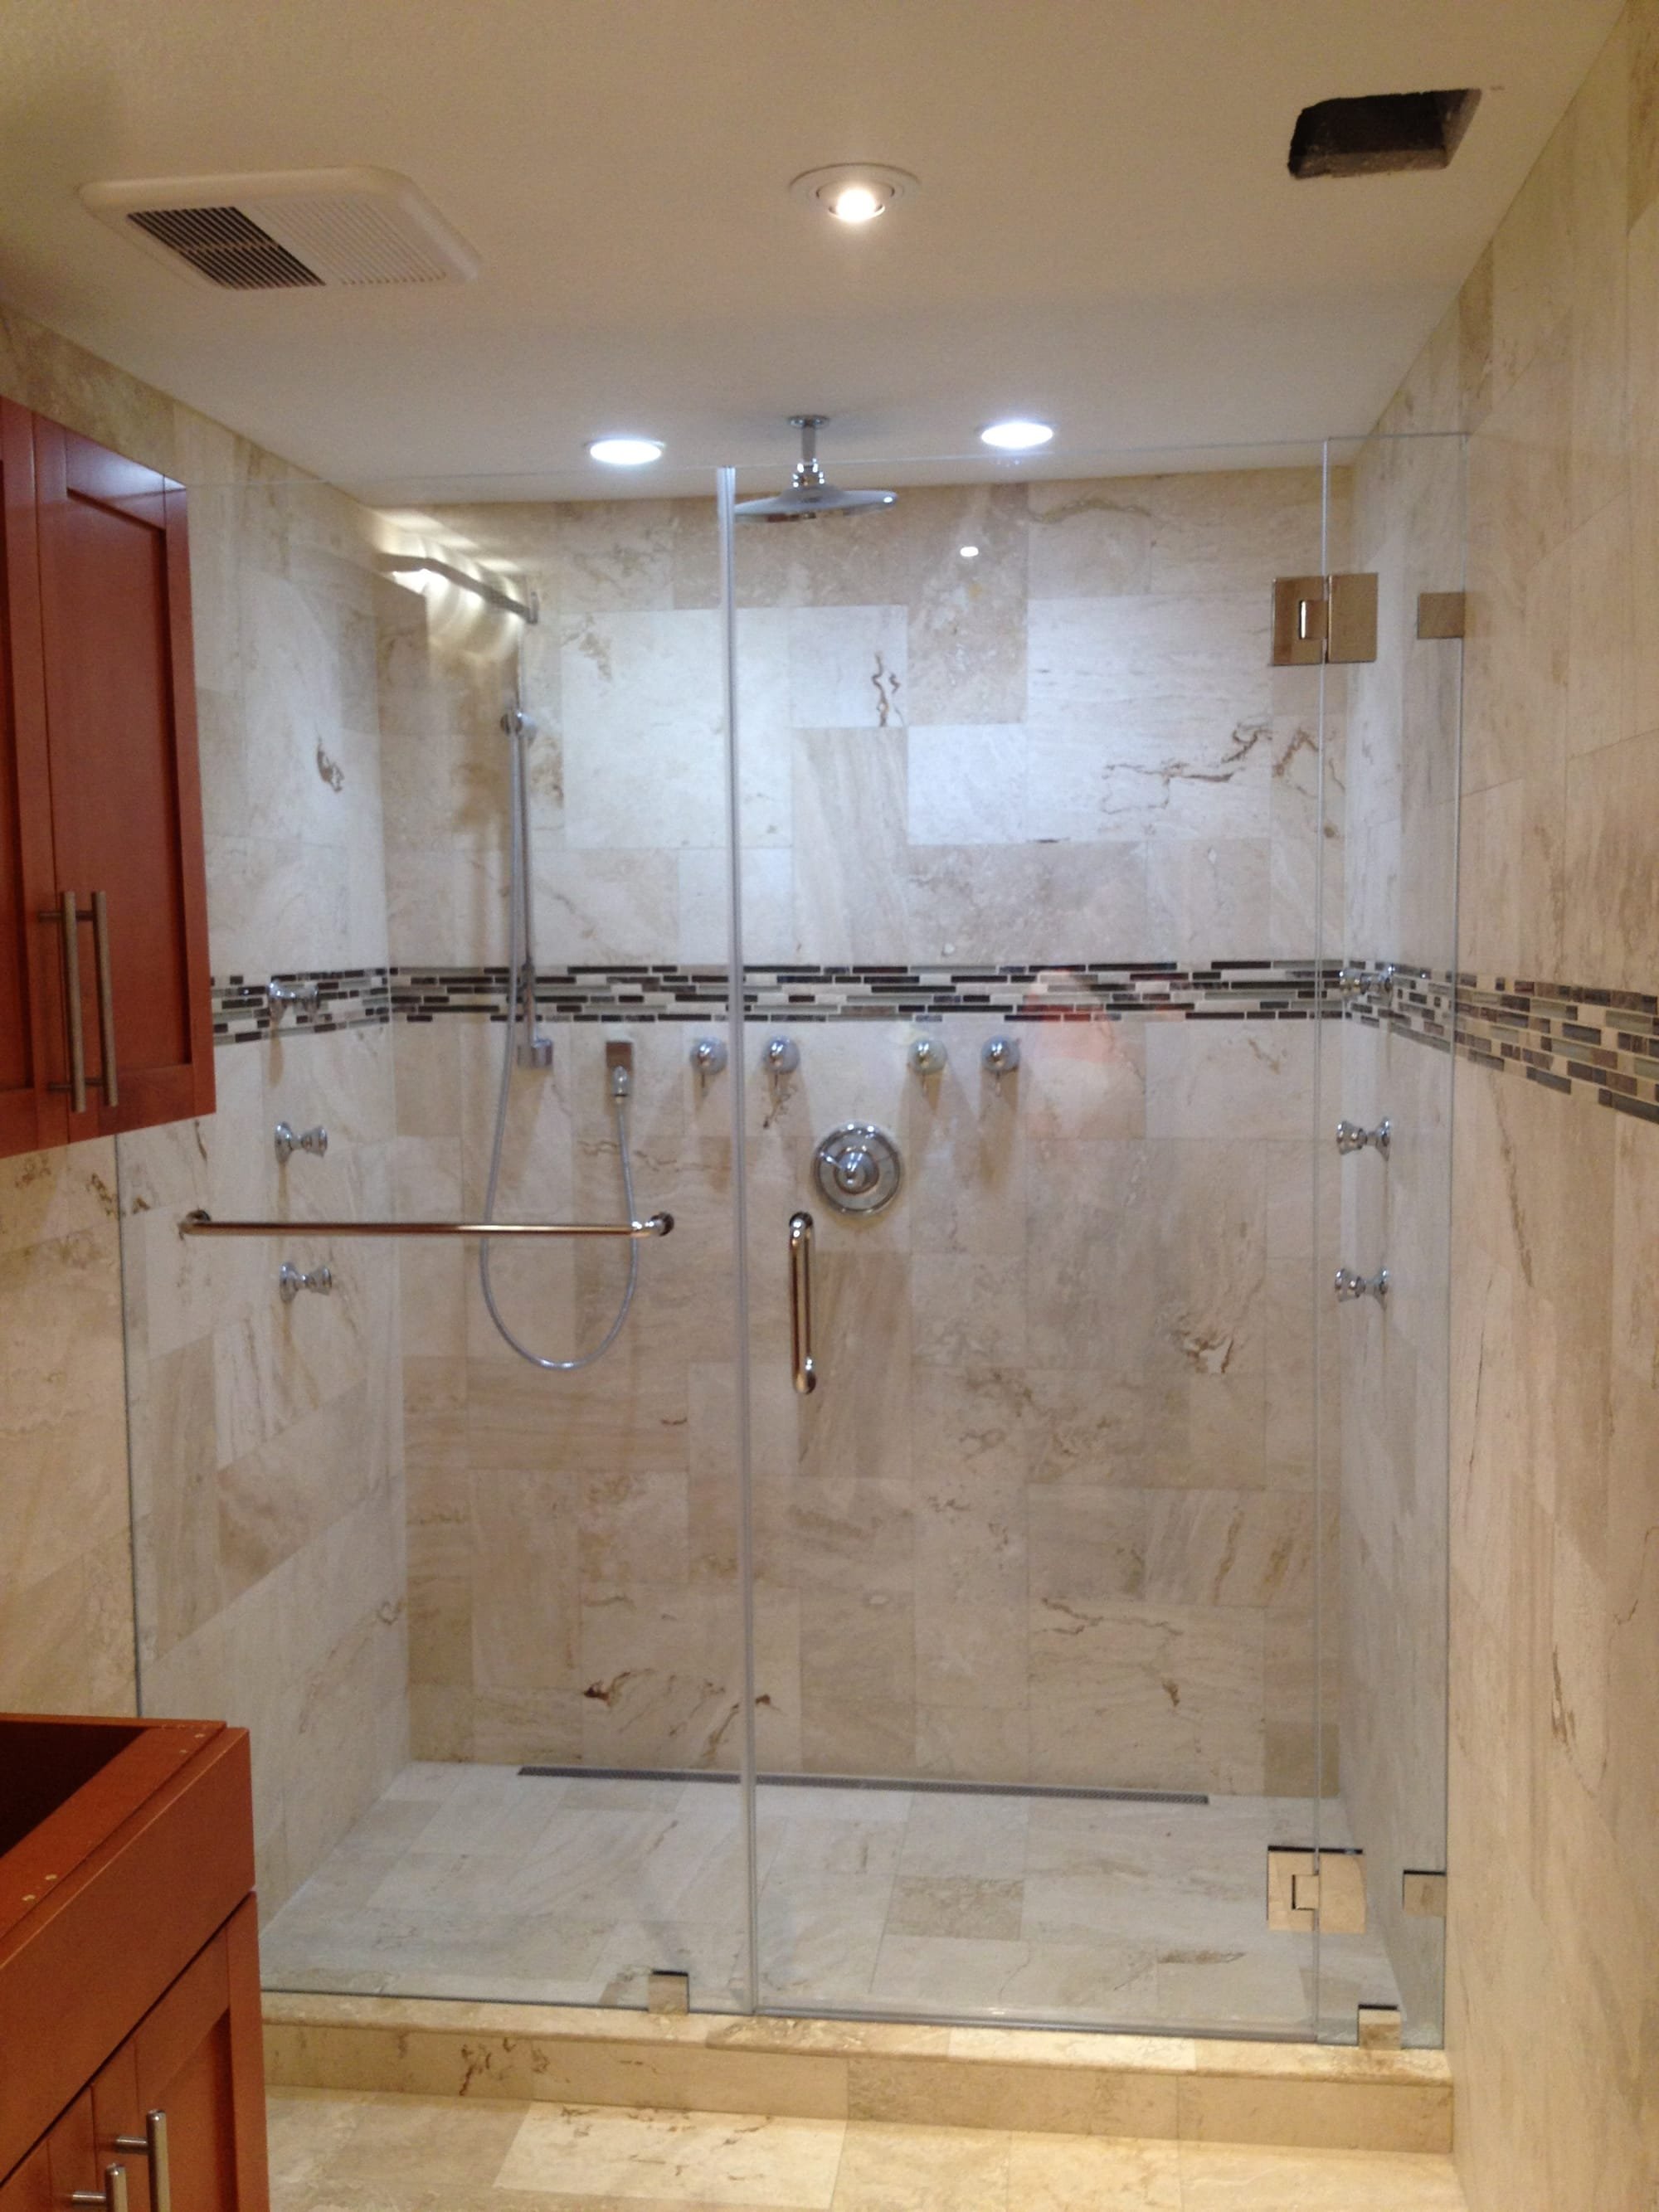 Glass Shower Doors Miami are Going to Bring that Missing Feel and Appeal!